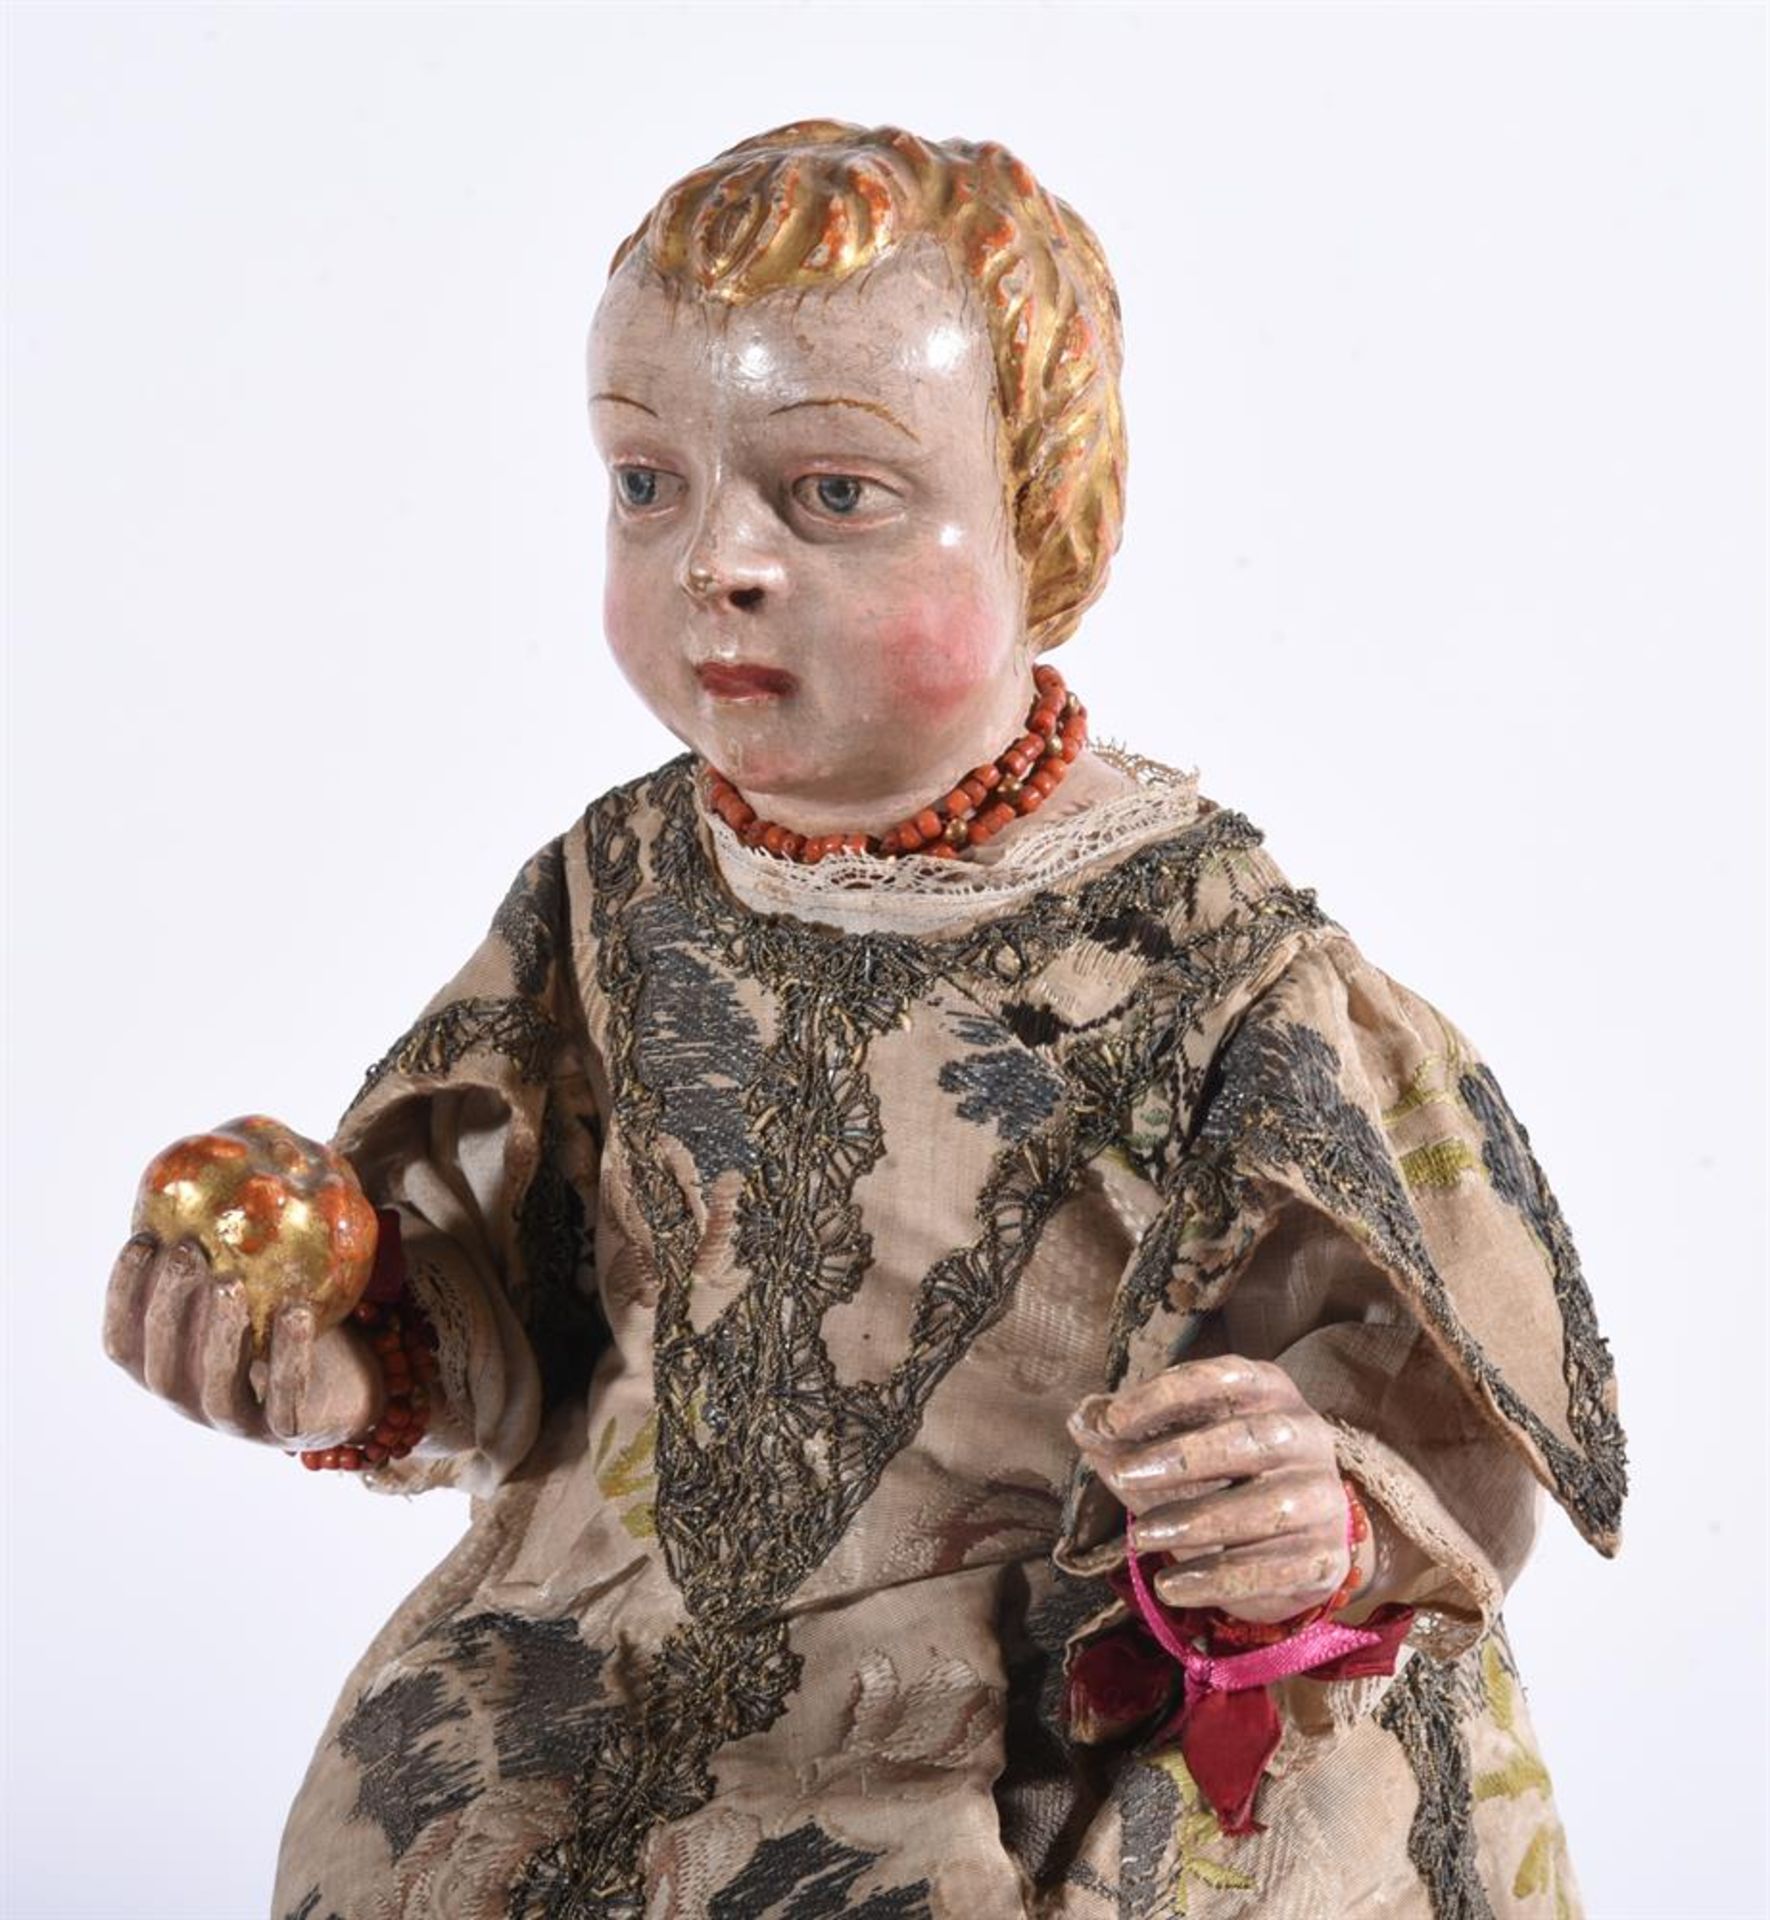 A SPANISH COLONIAL CARVED POLYCHROME FIGURE OF THE SEATED CHRIST - Image 2 of 3